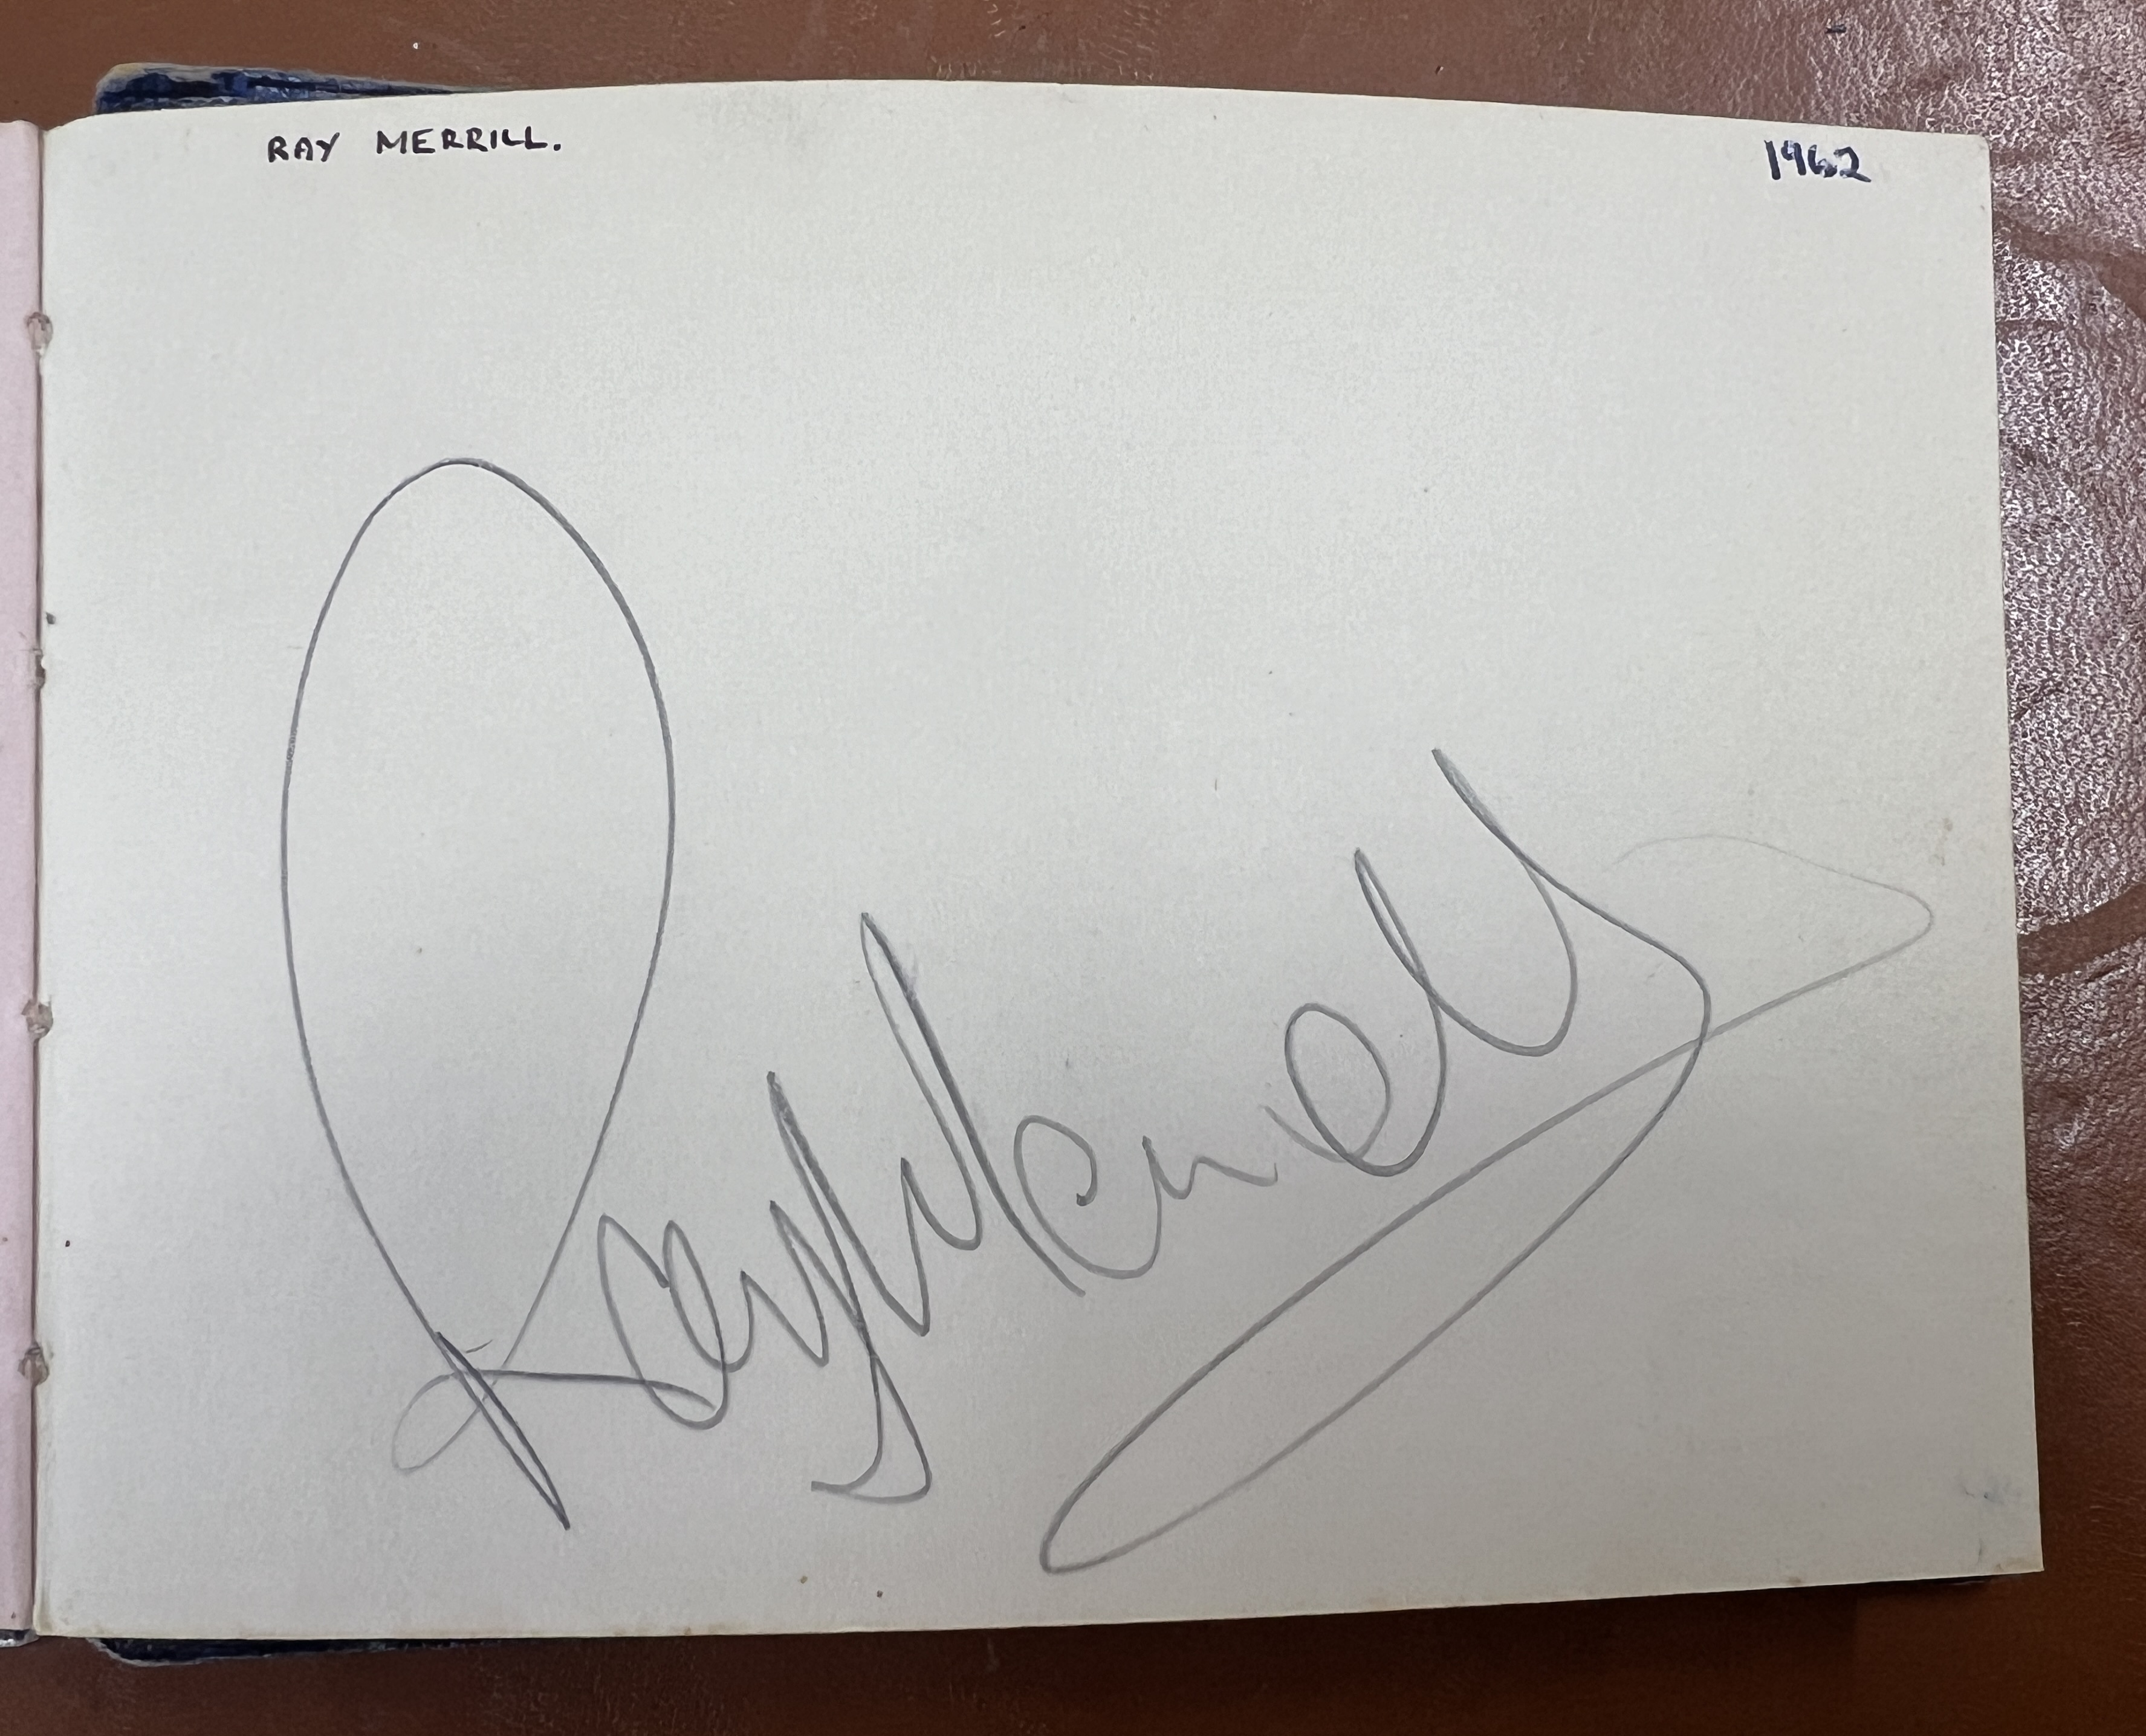 A 1960's autograph album containing autographs of various celebrities including Cliff Richard, - Image 5 of 37